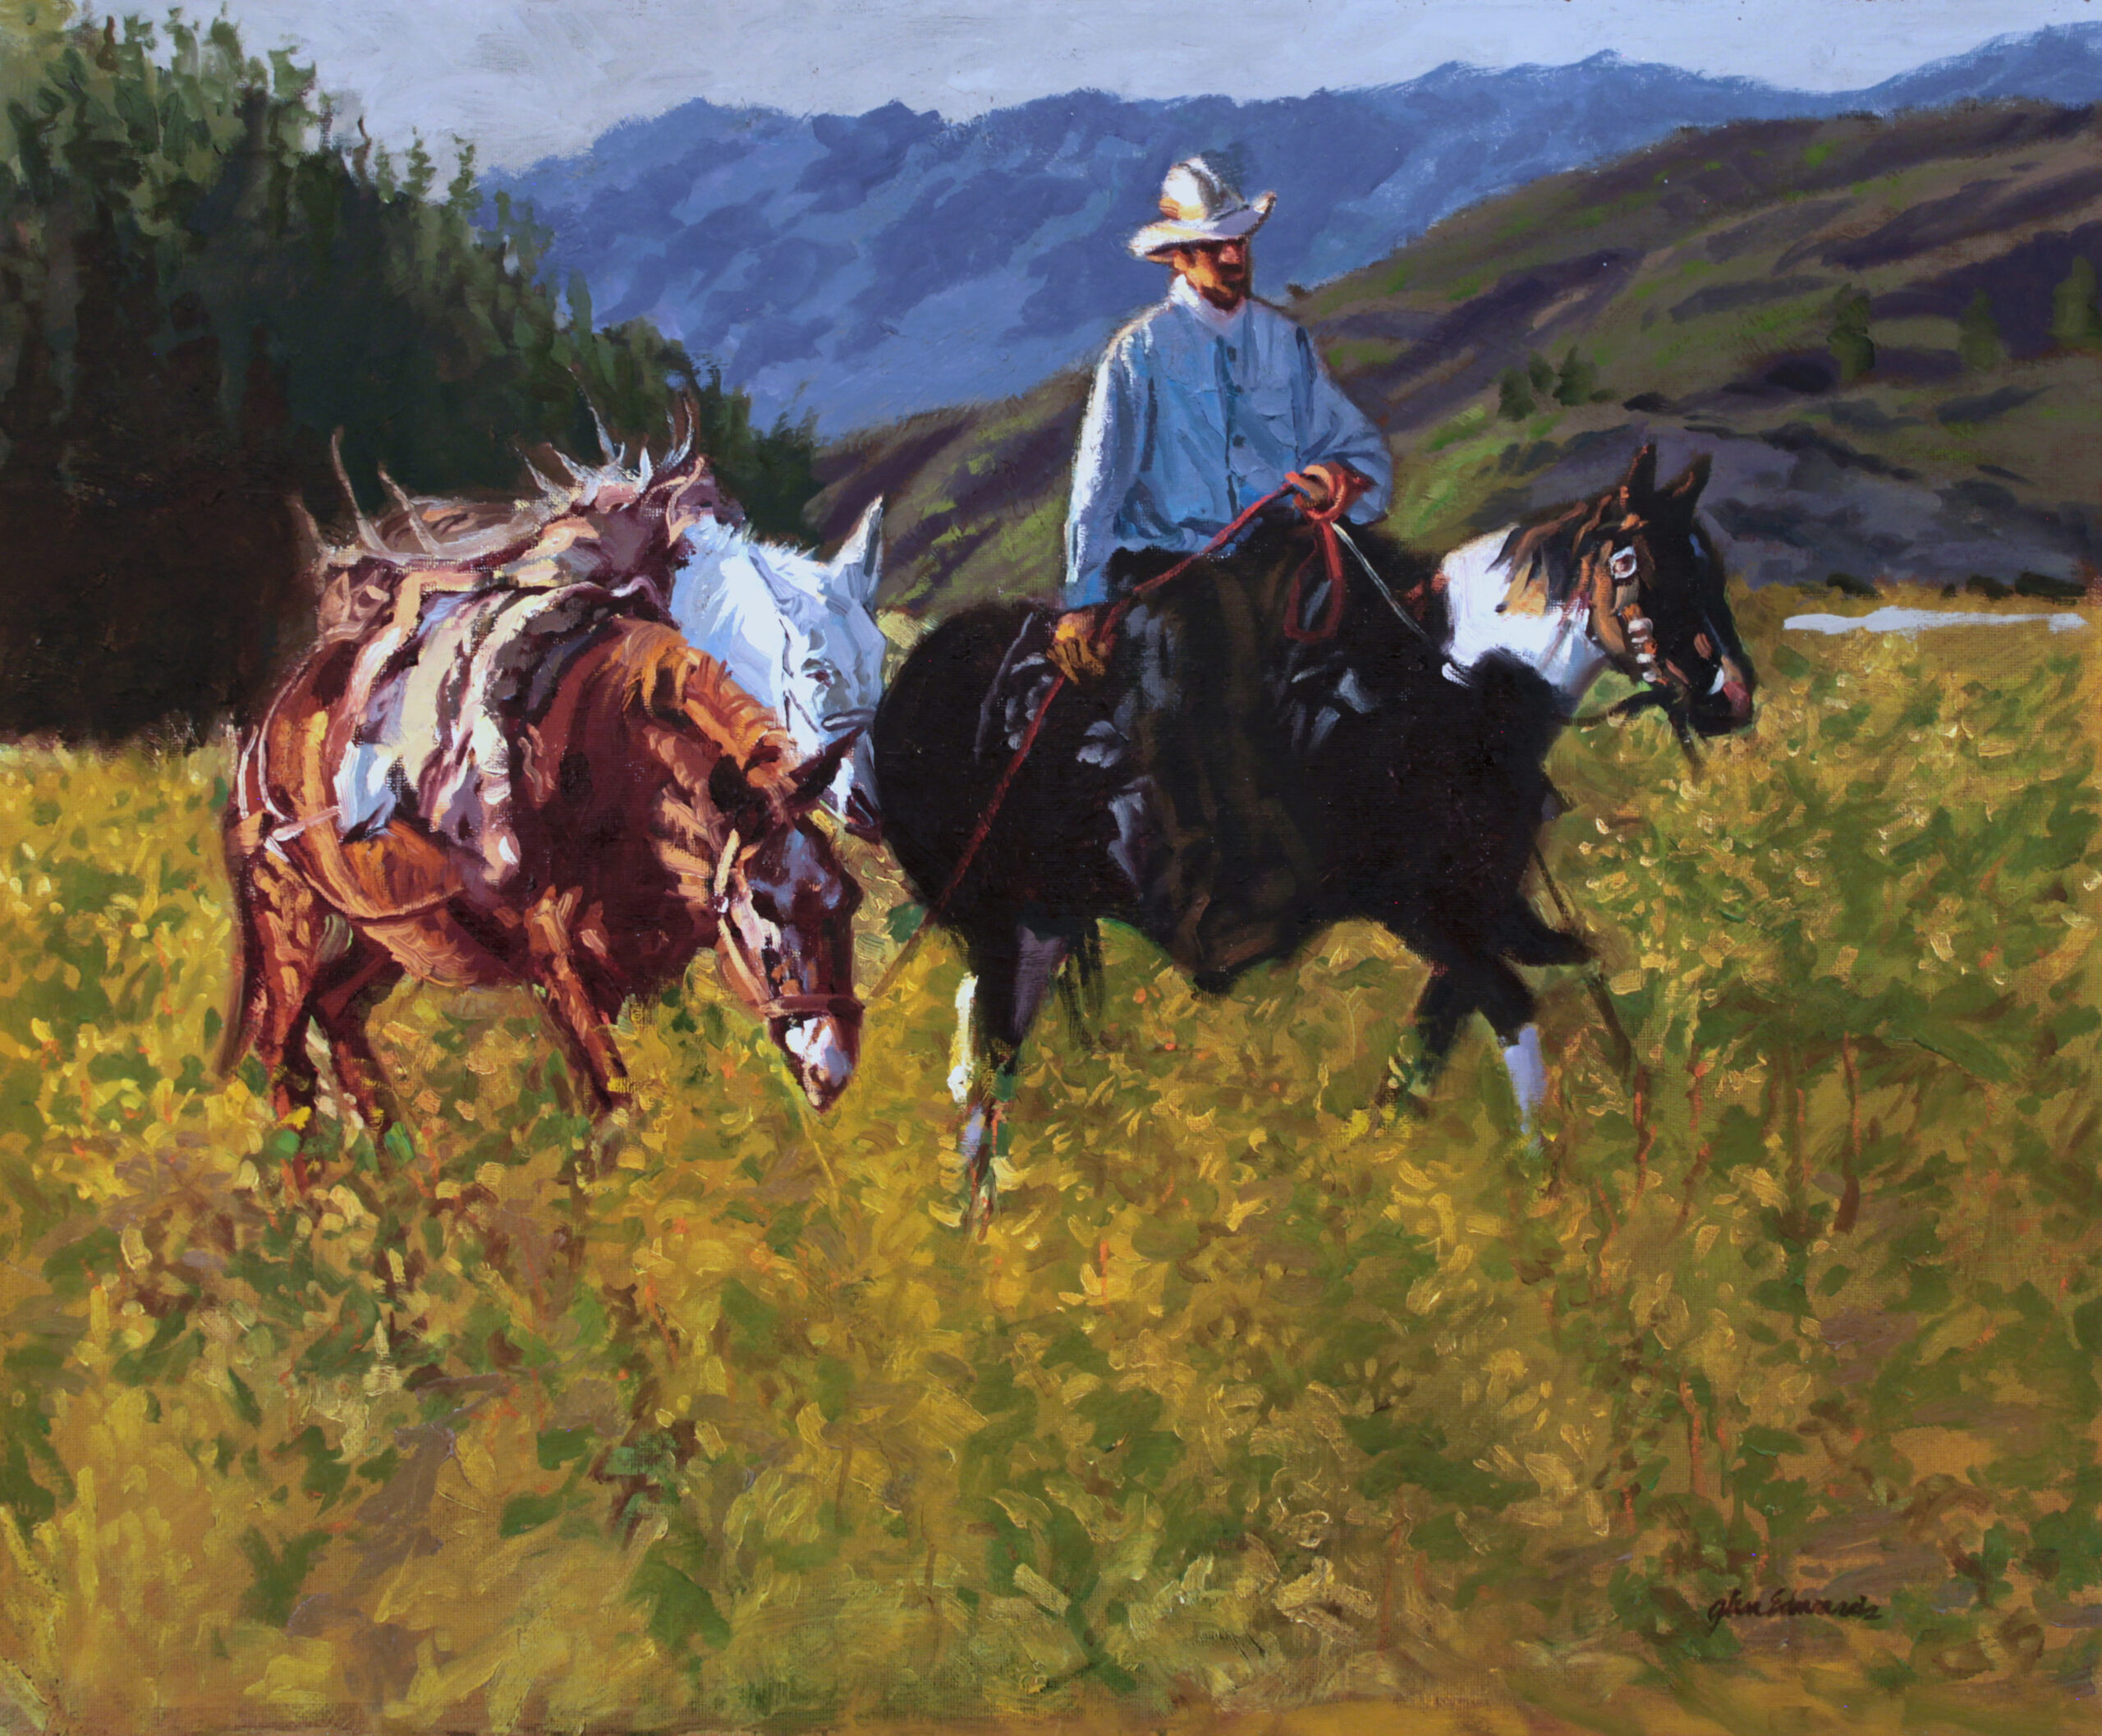 painting of a cowboy riding a horse and leading two other horses